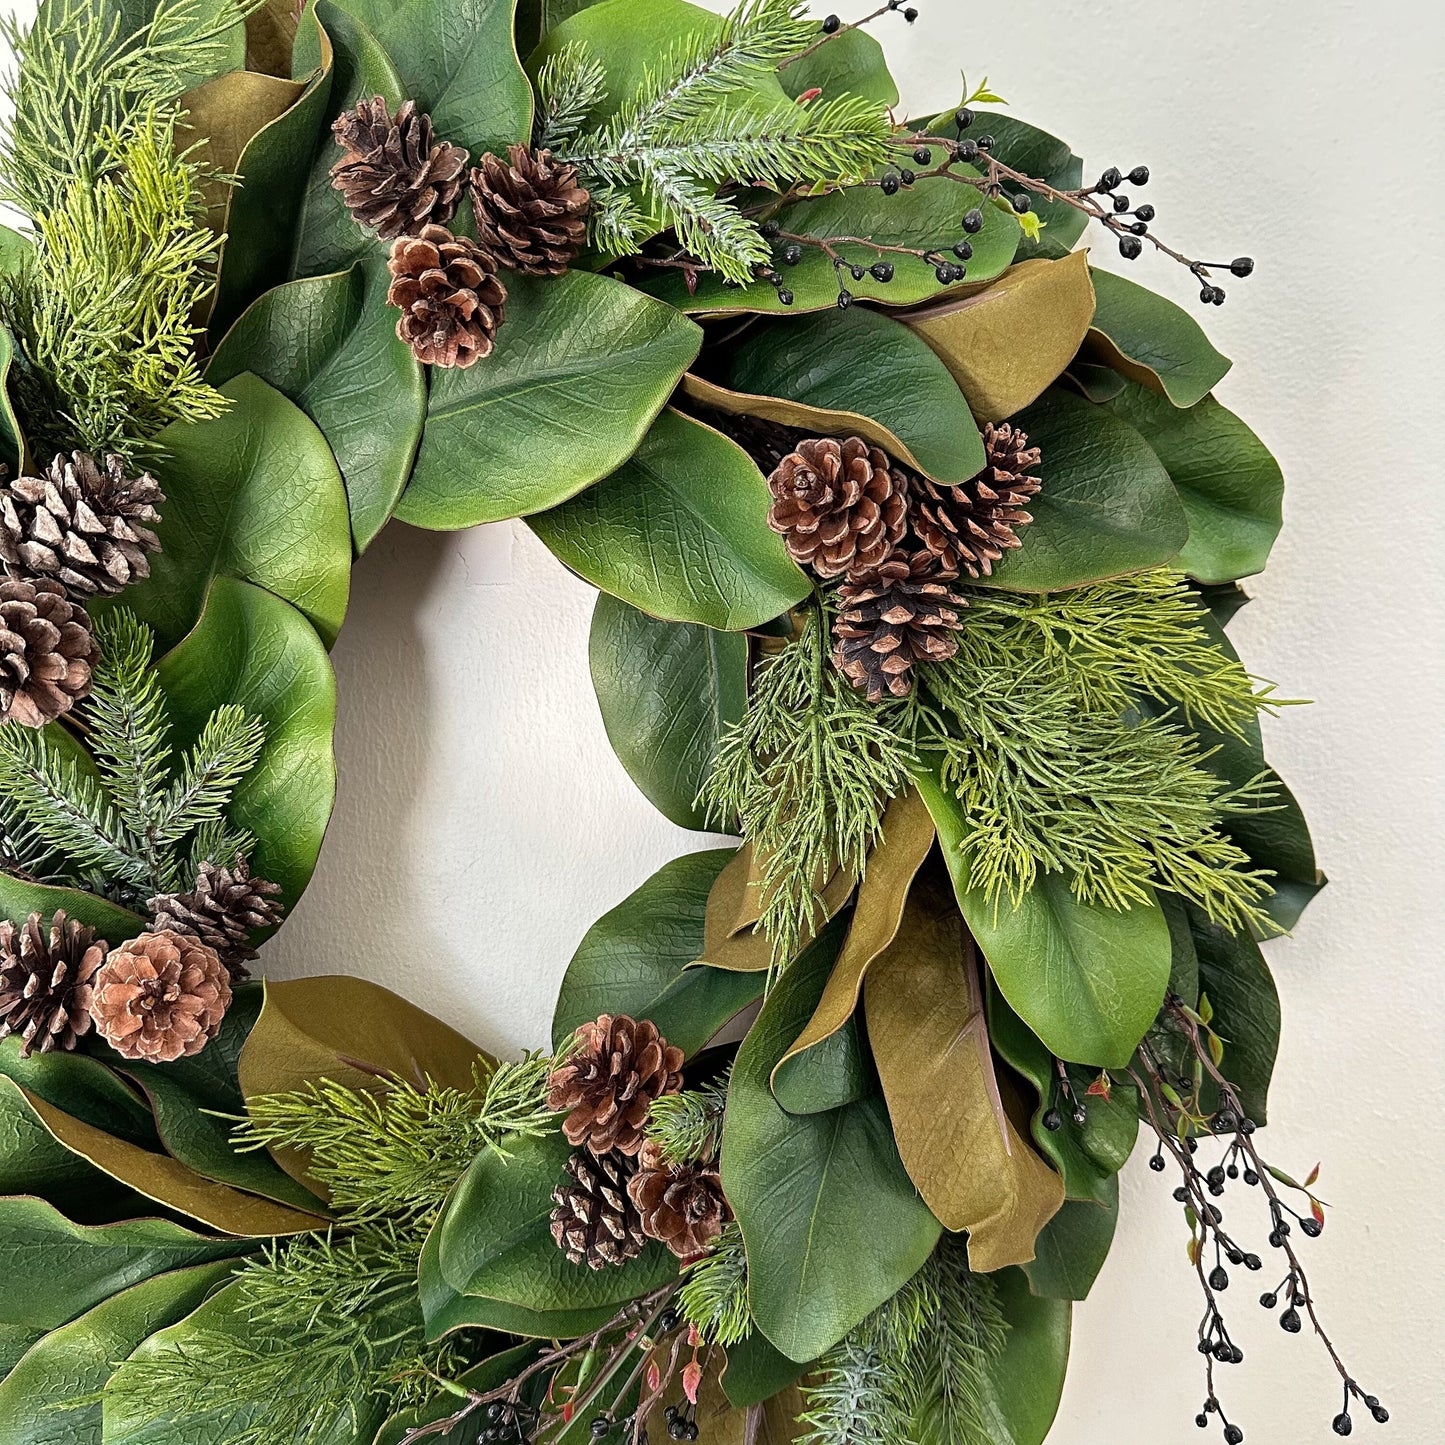 Christmas Wreath with Magnolia, Evergreen, and Pinecones, Magnolia Wreath for Front Door Holiday Decorations, Winter Magnolia Decor